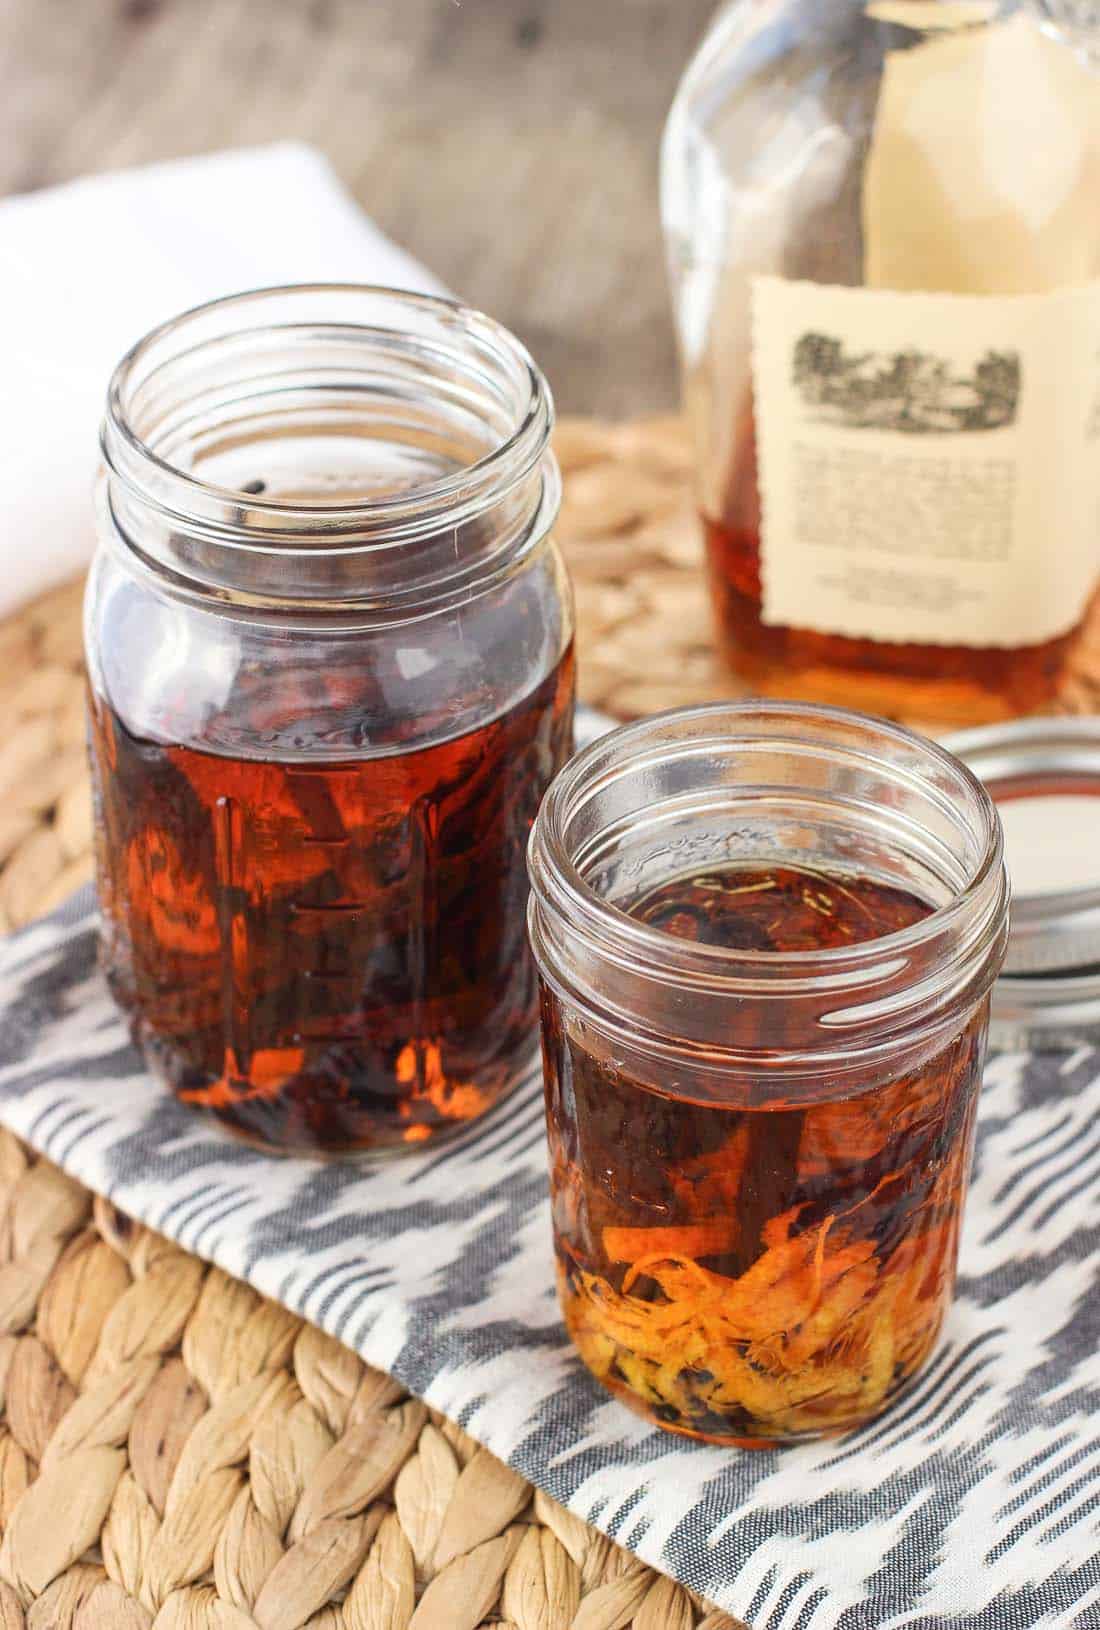 Two jars of vanilla extract: one with vanilla beans and one also with orange rind.